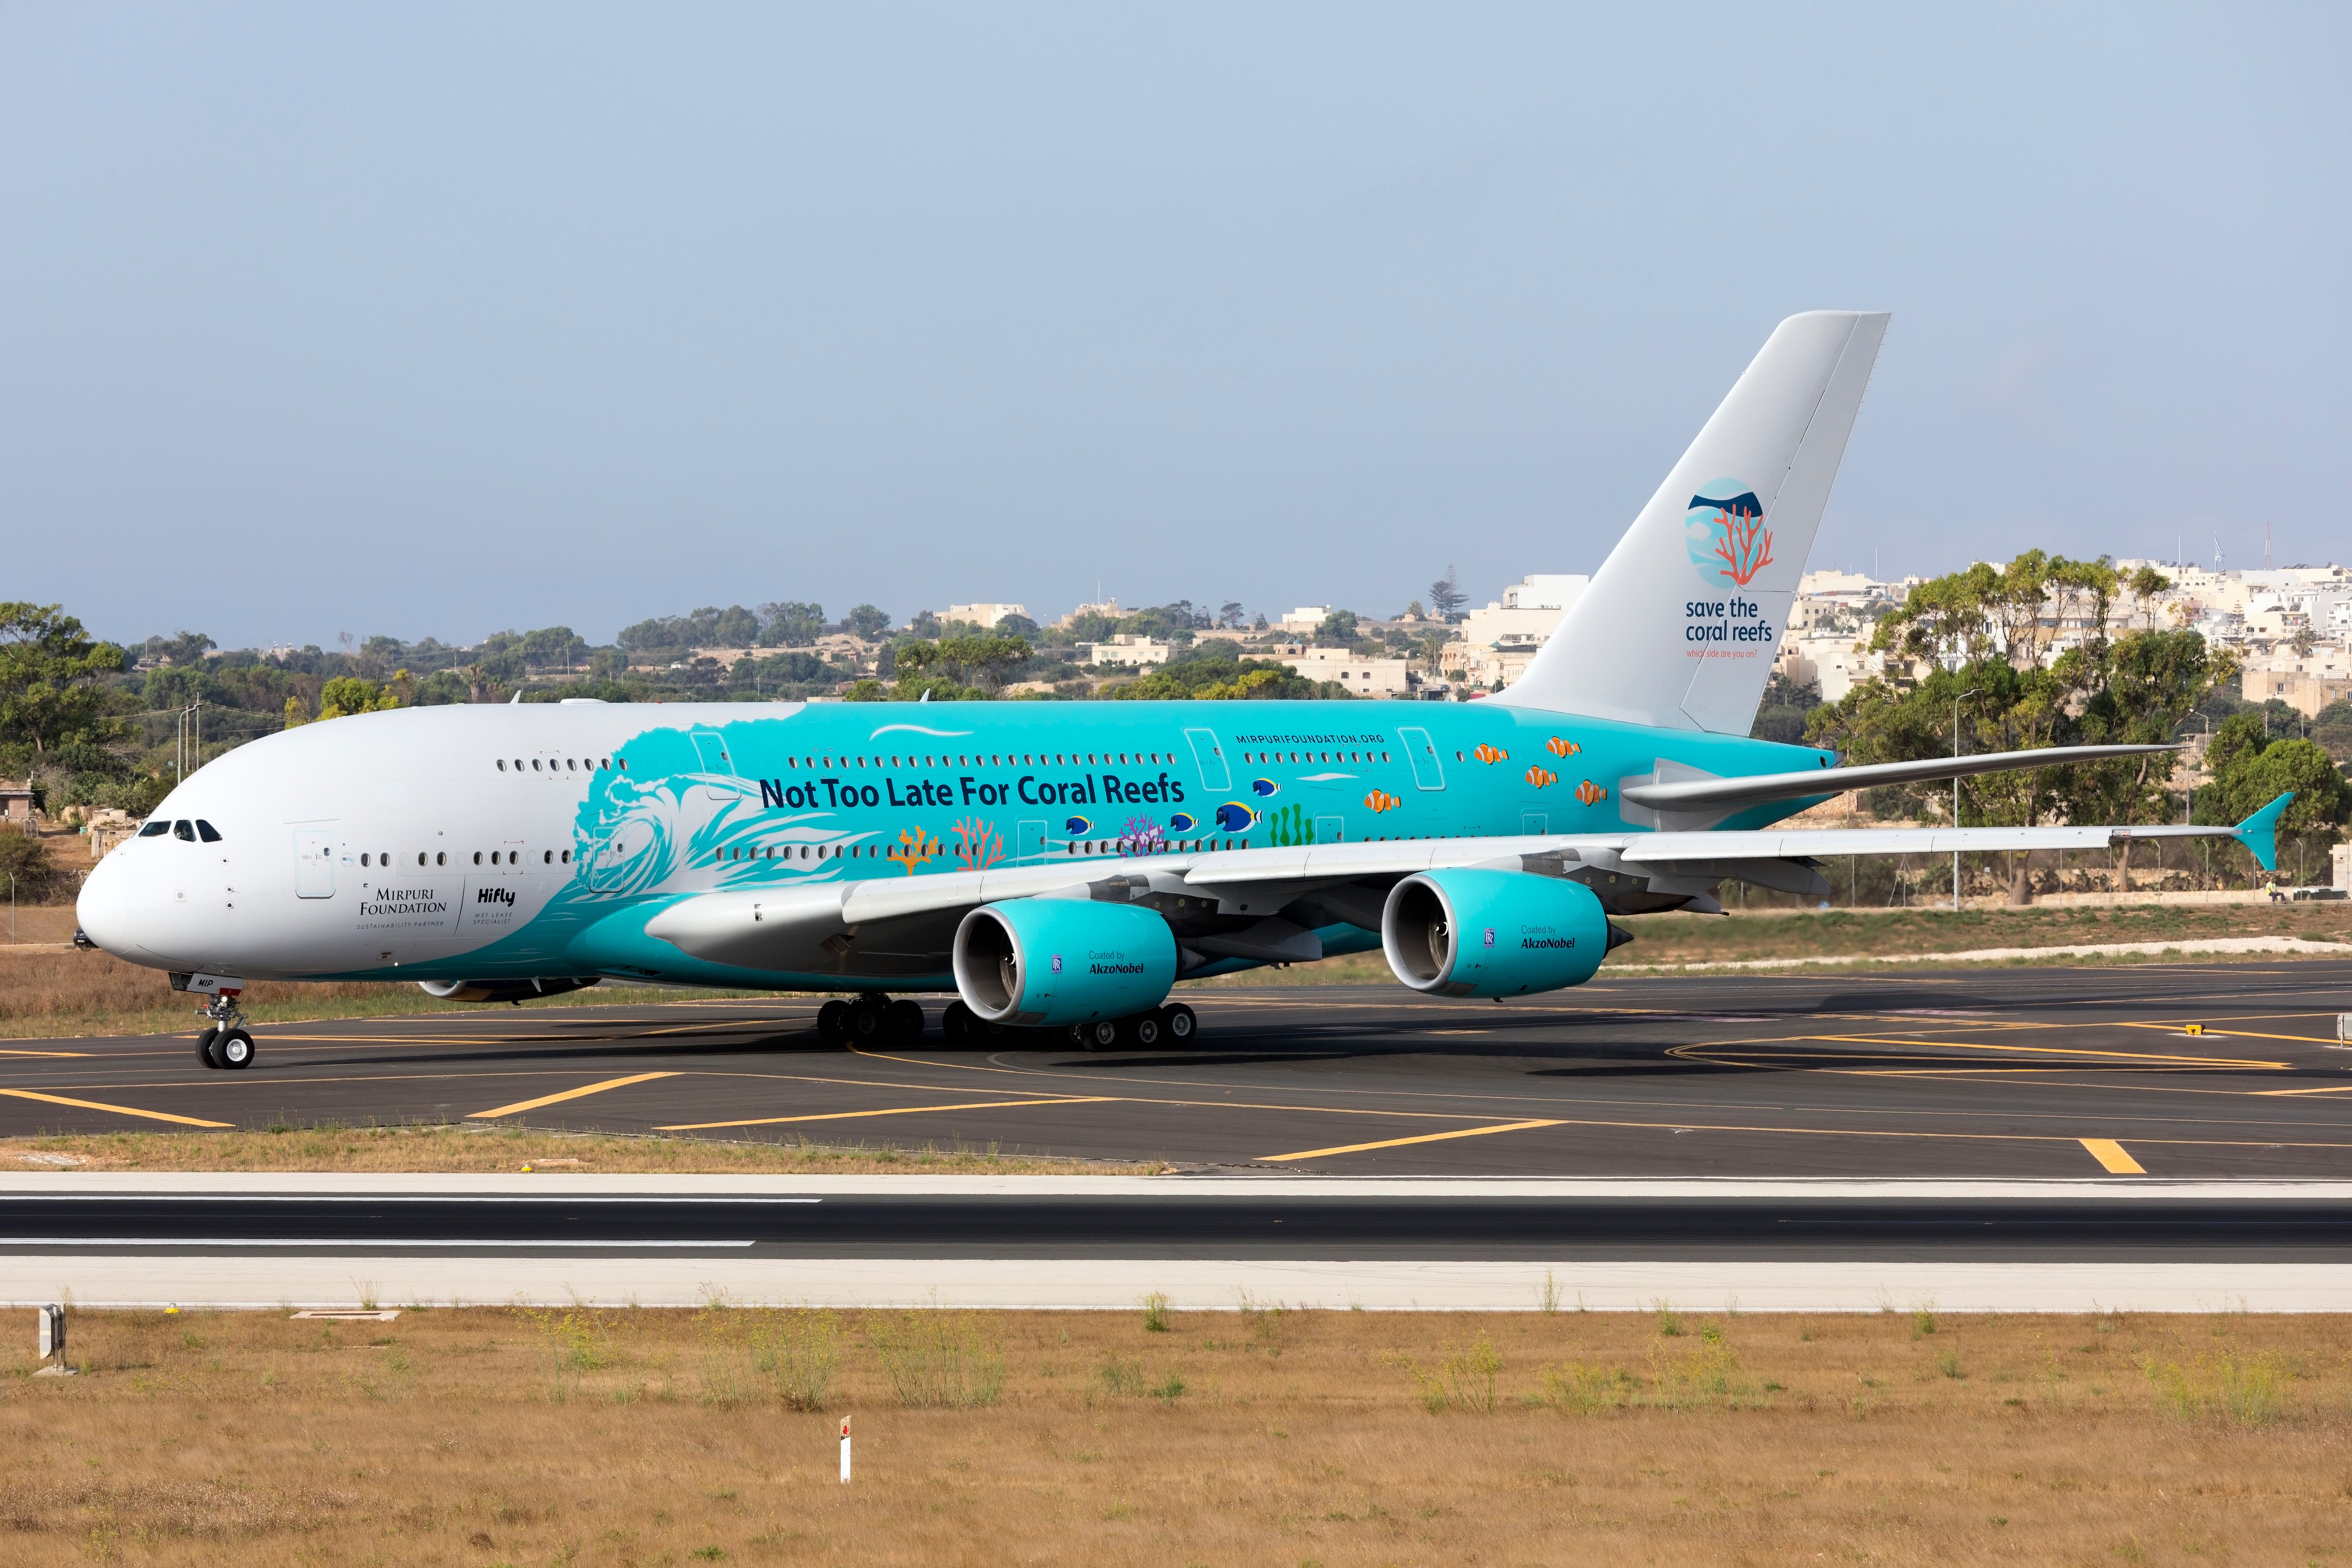 A Hi Fly Malta Airbus A380-841 in a `Save the Coral Reefs` livery taxiing at an airport.